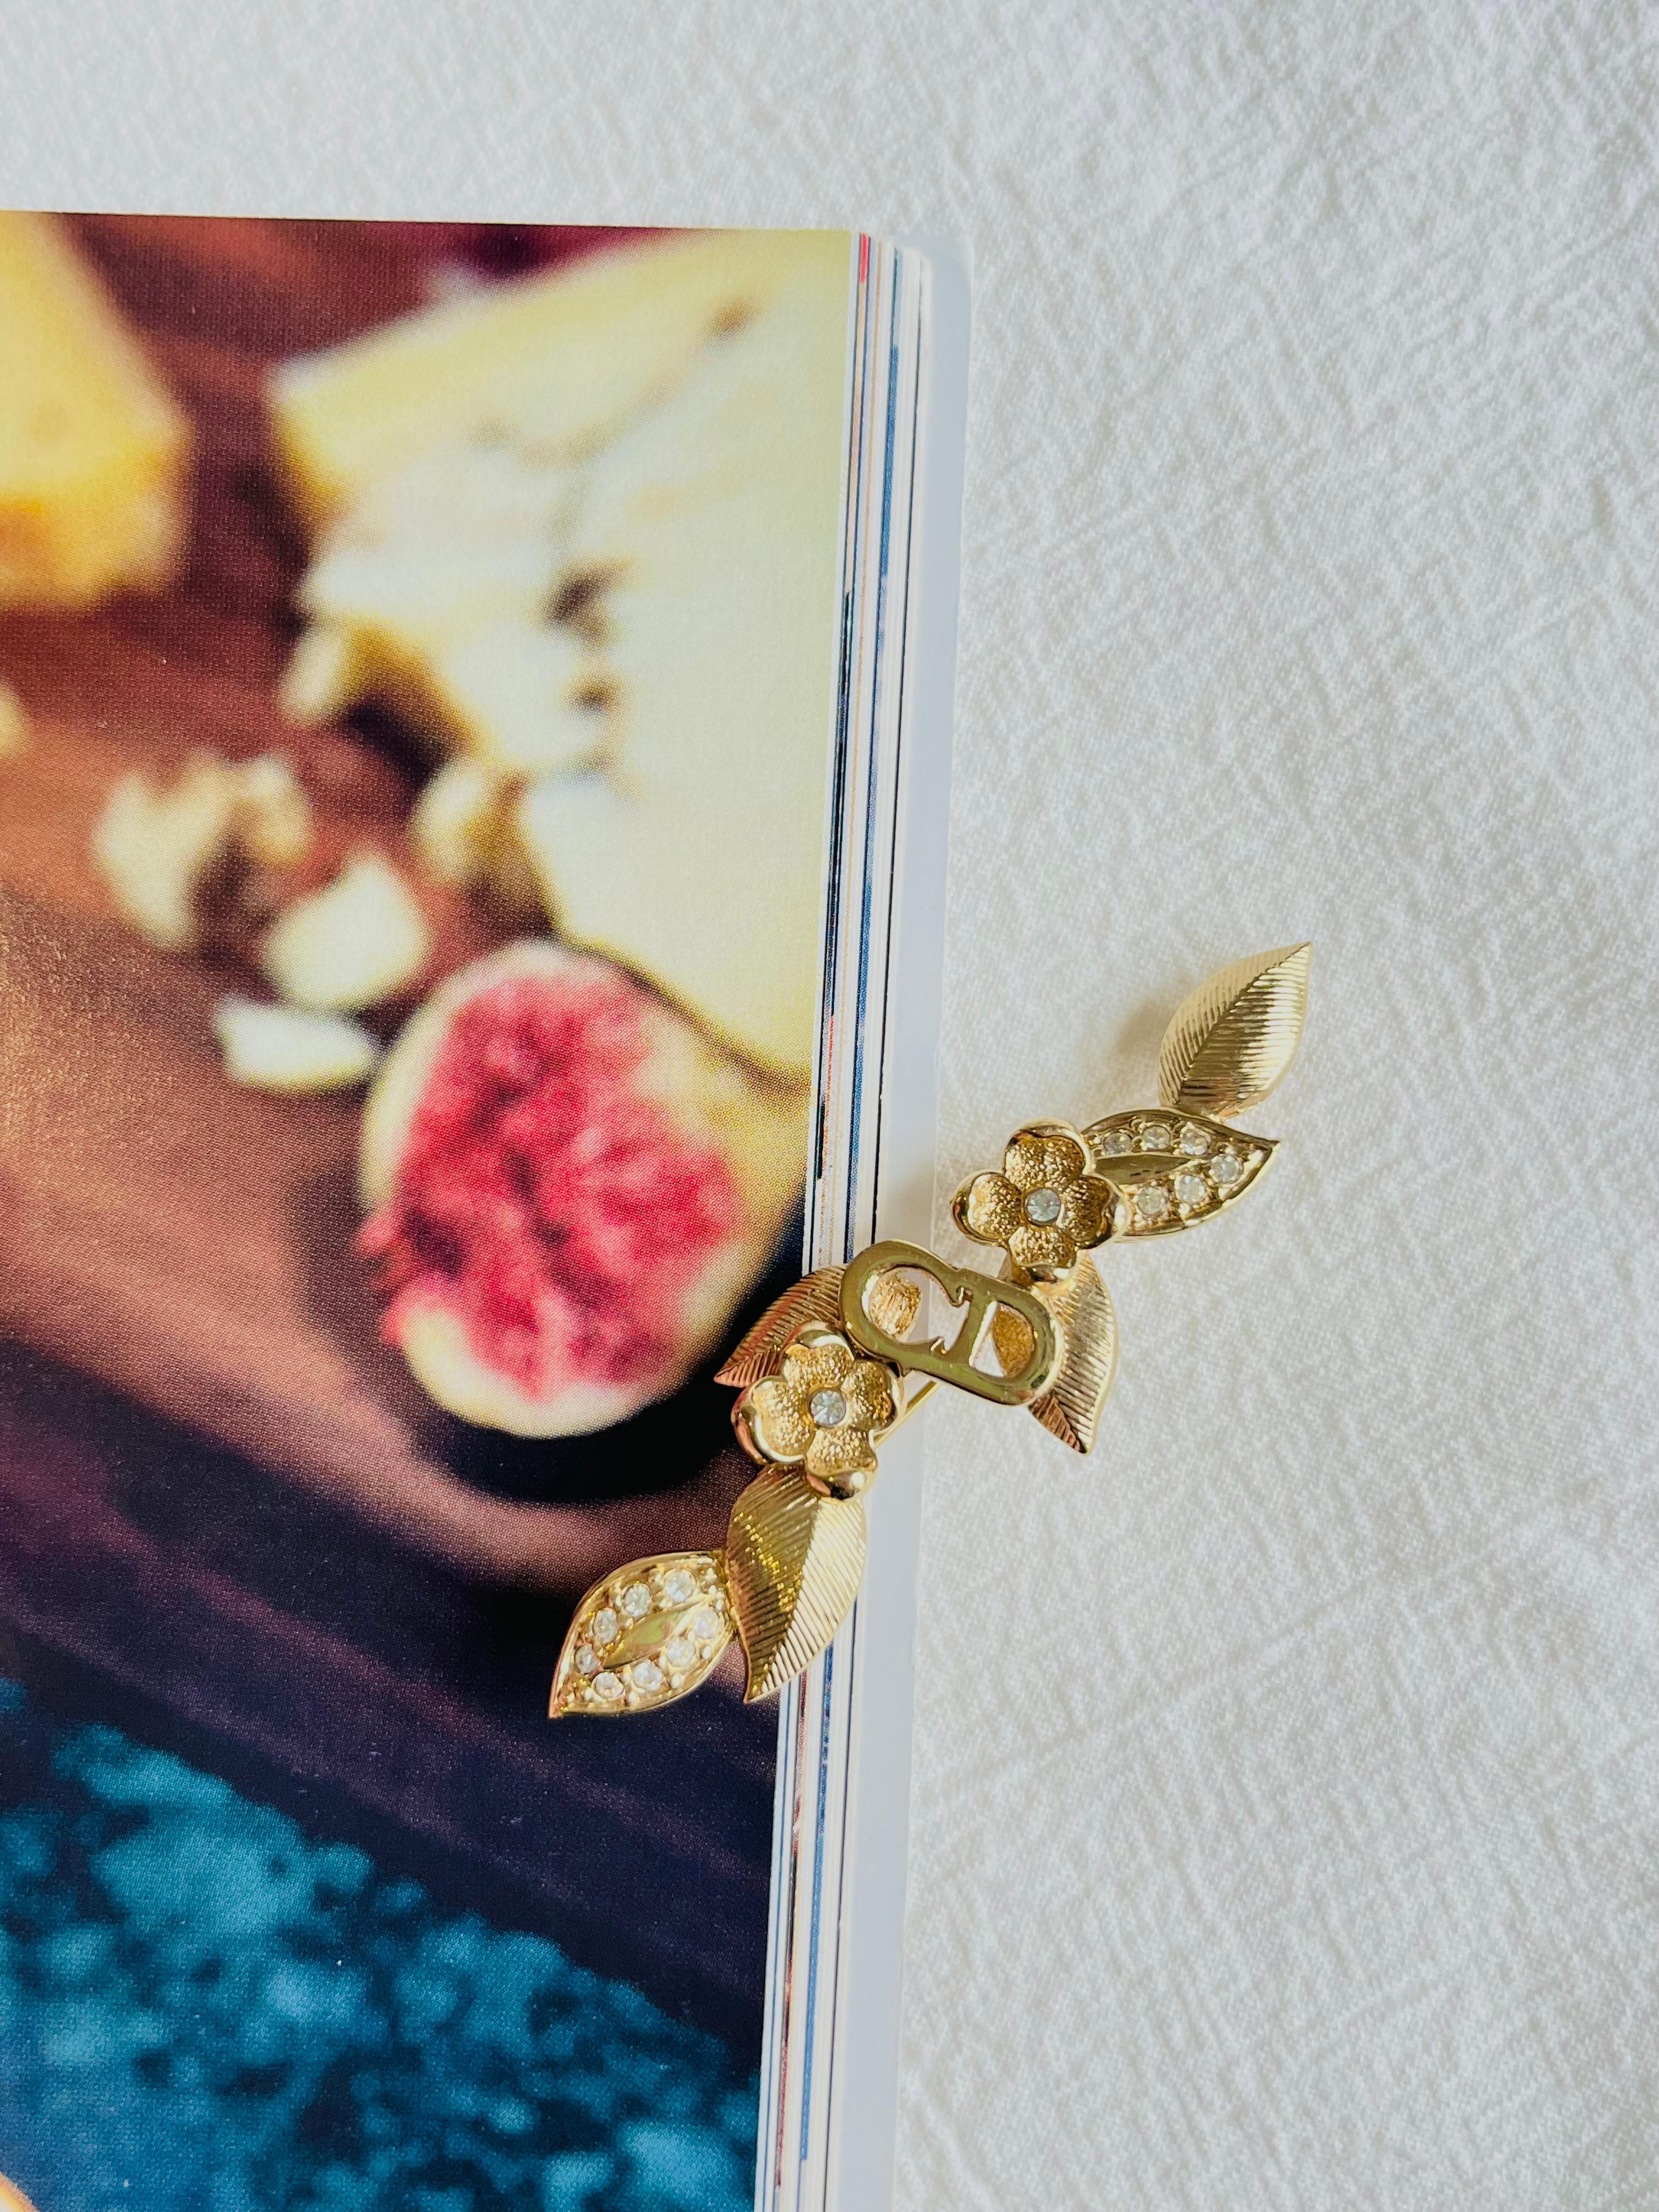 Very excellent condition. Very new. 100% genuine.

A unique piece. This is gold plated stylised brooch.

Size: 6.4 cm x 1.8 cm.

Weight: 9.0 g.

_ _ _

Great for everyday wear. Come with velvet pouch and beautiful package.

Makes the perfect gift